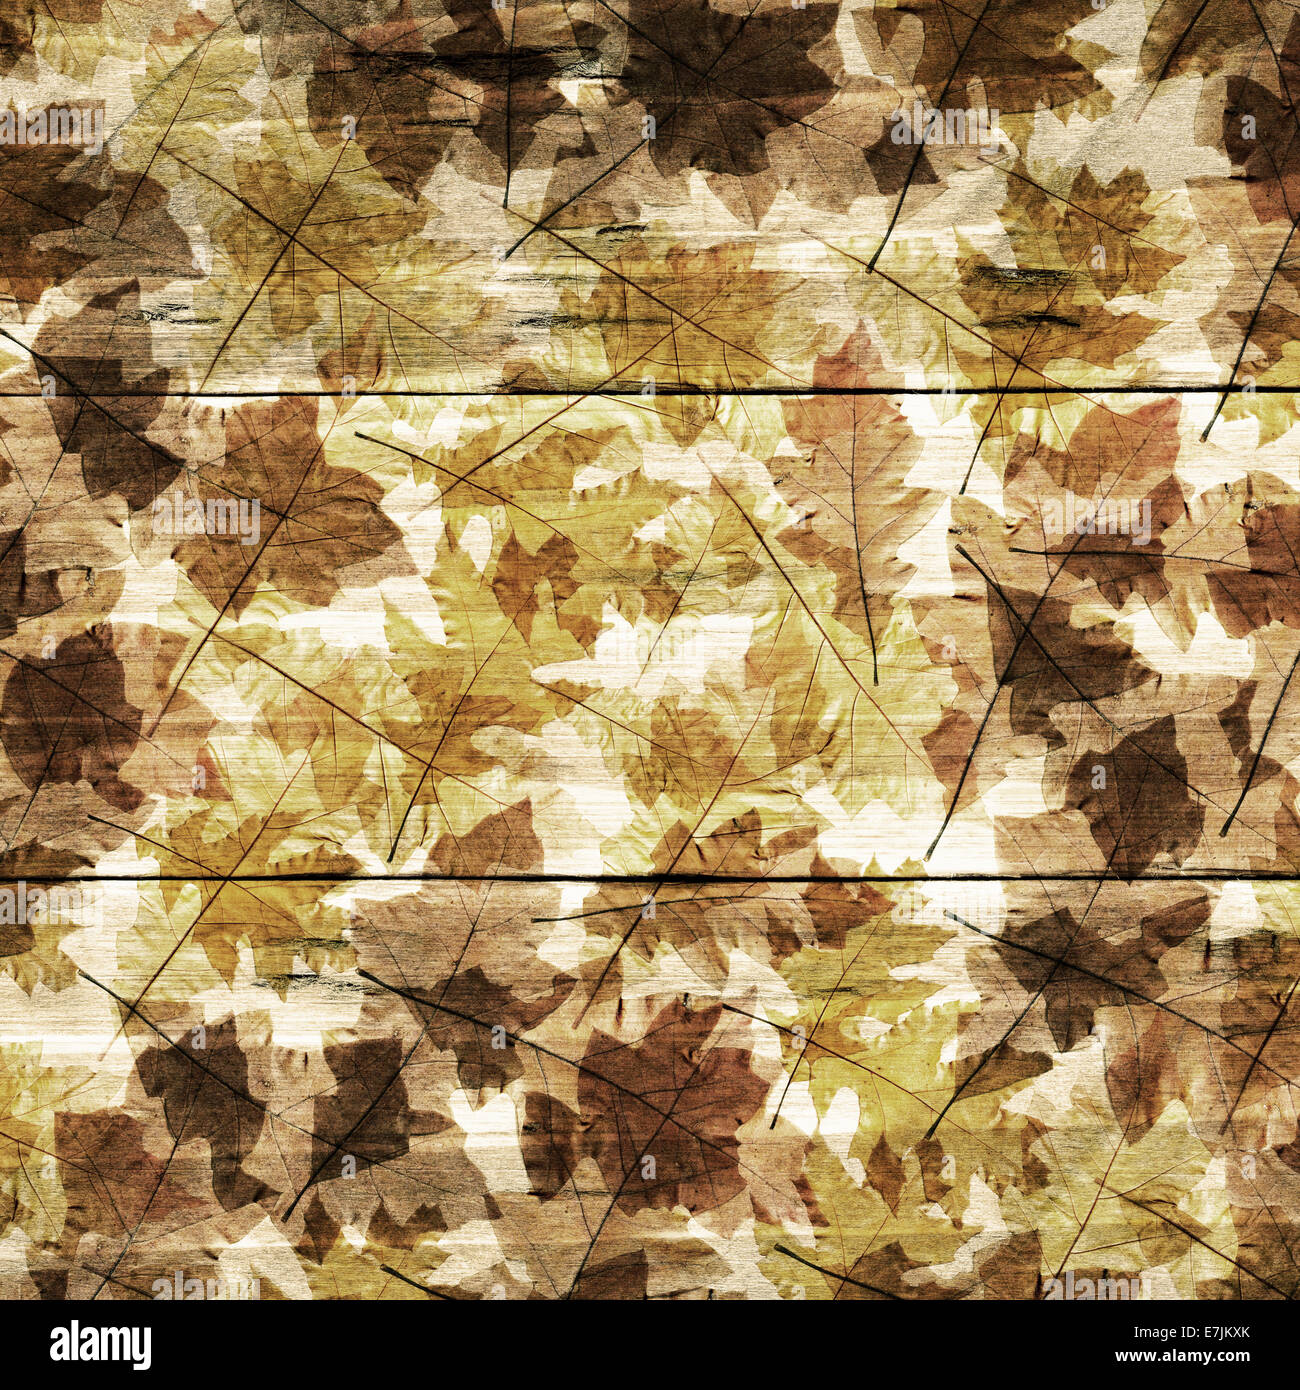 dry leafs on wood. Autumn background Stock Photo